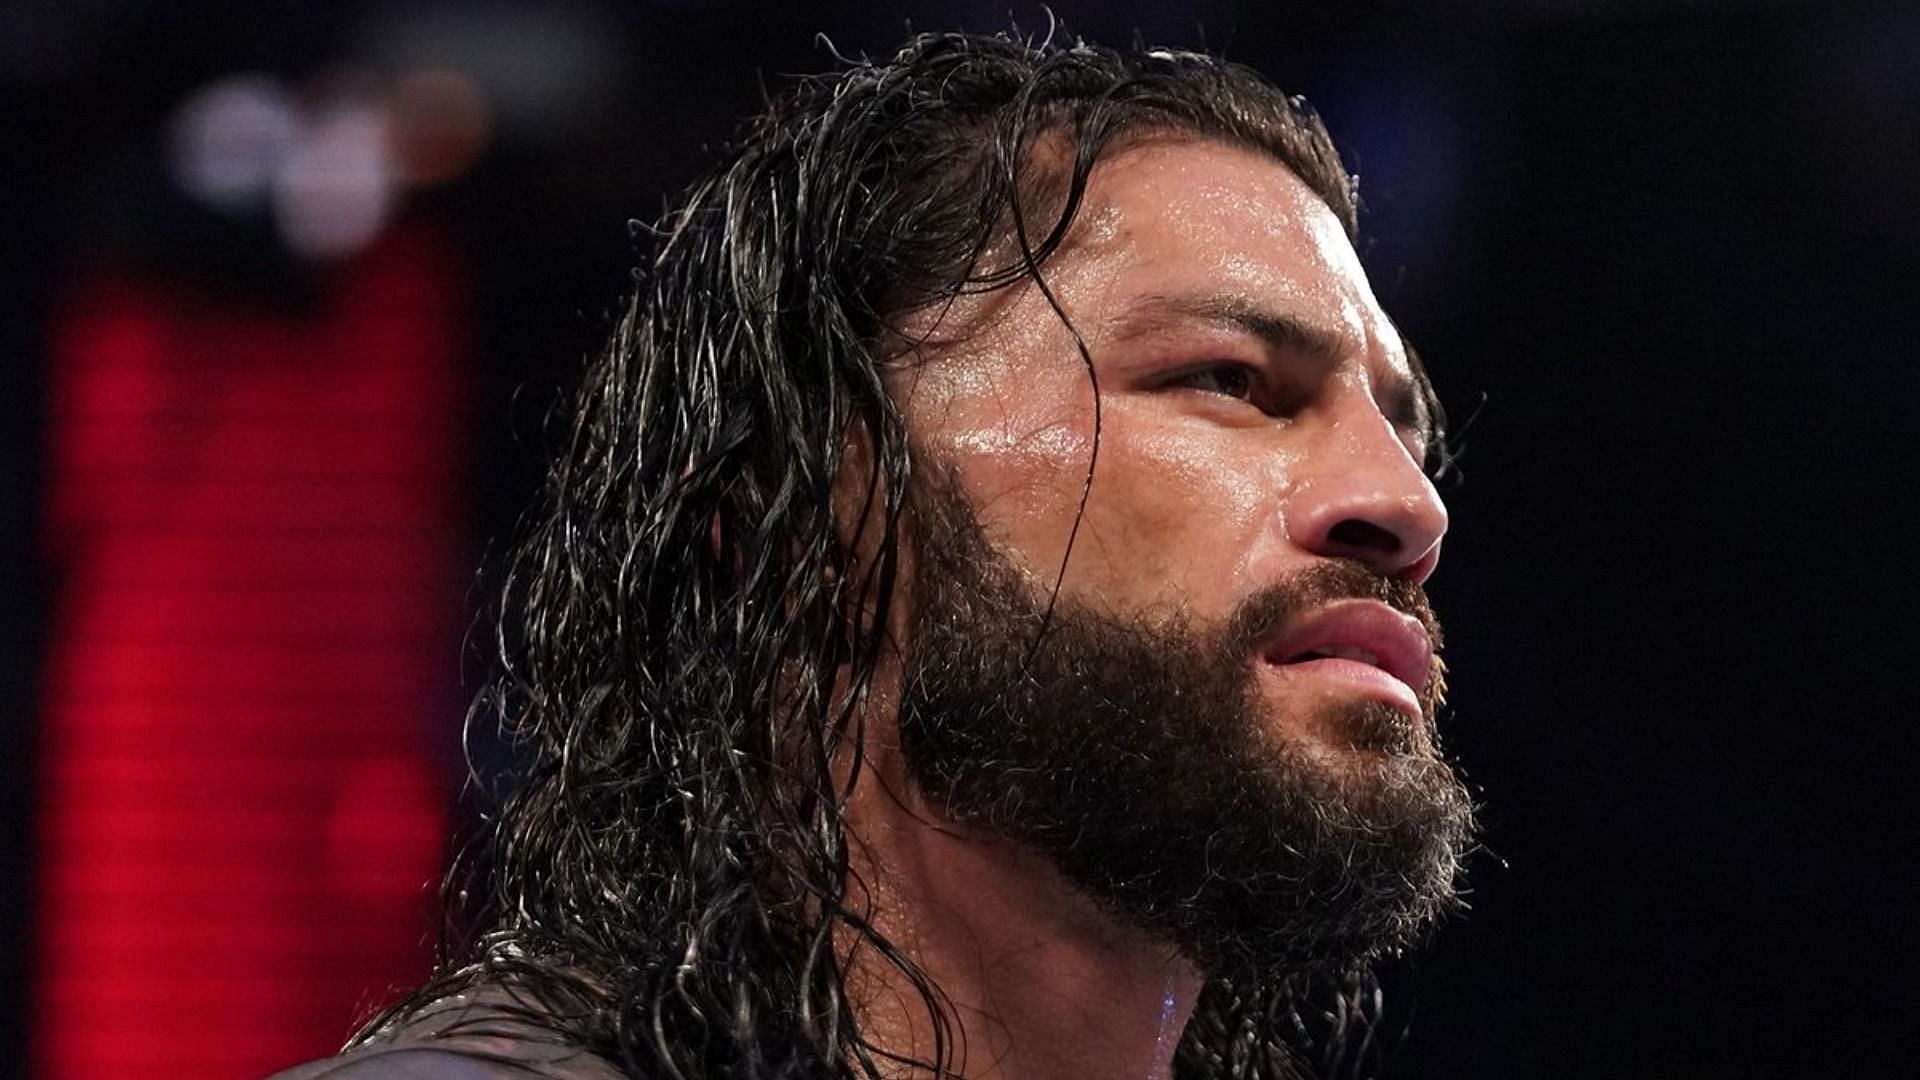 Roman Reigns will reportedly miss Crown Jewel 2022